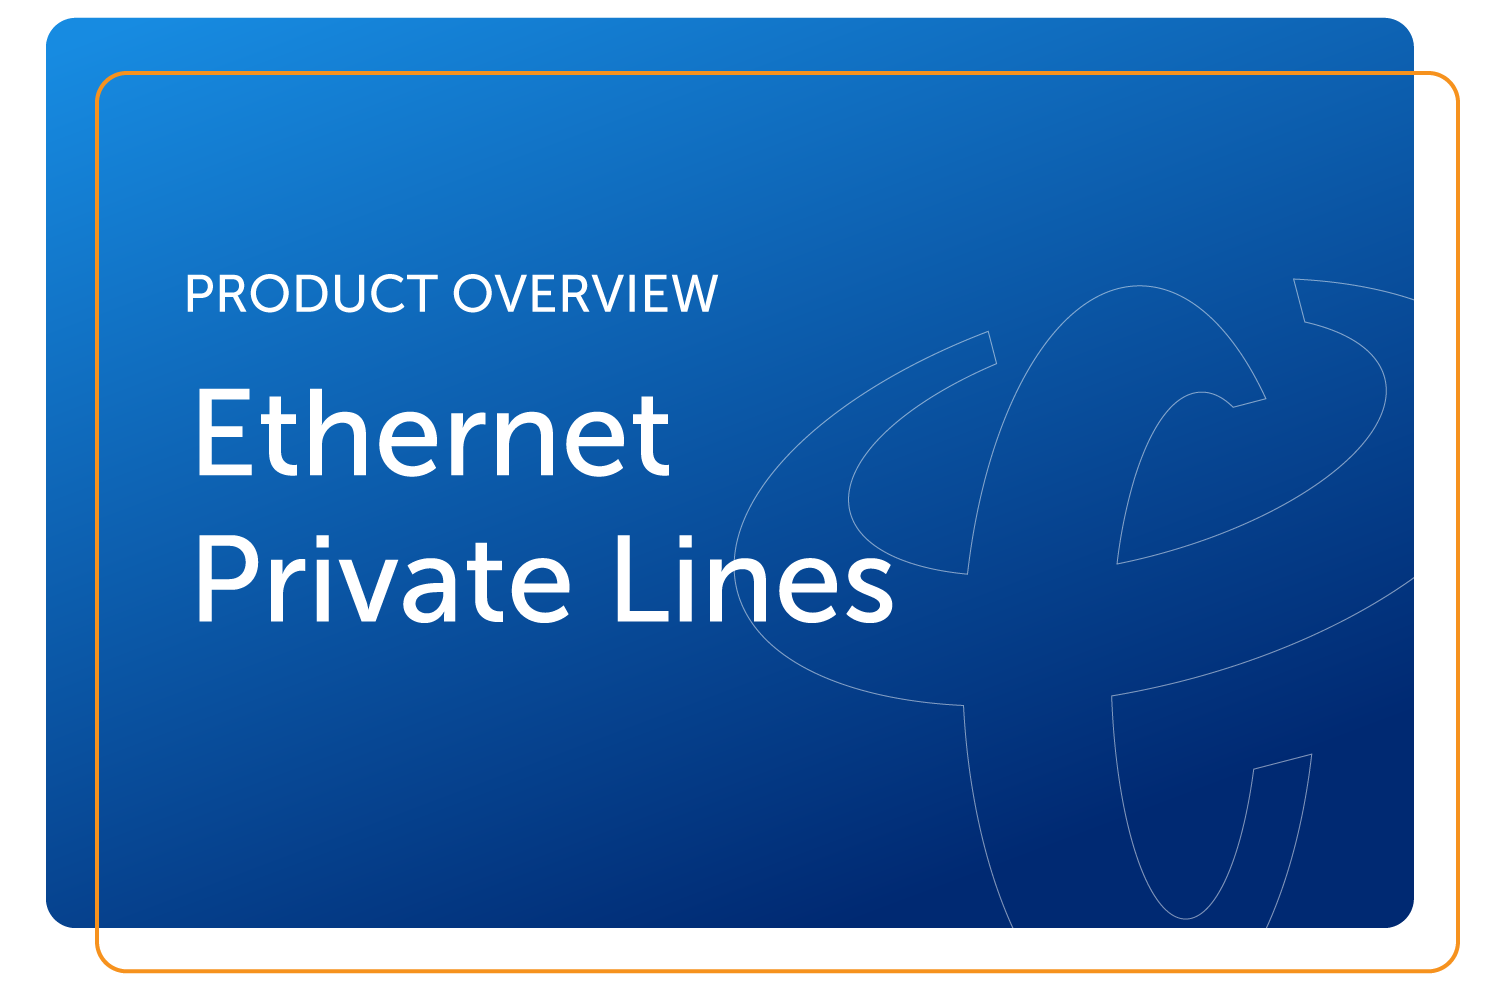 Ethernet Private Lines